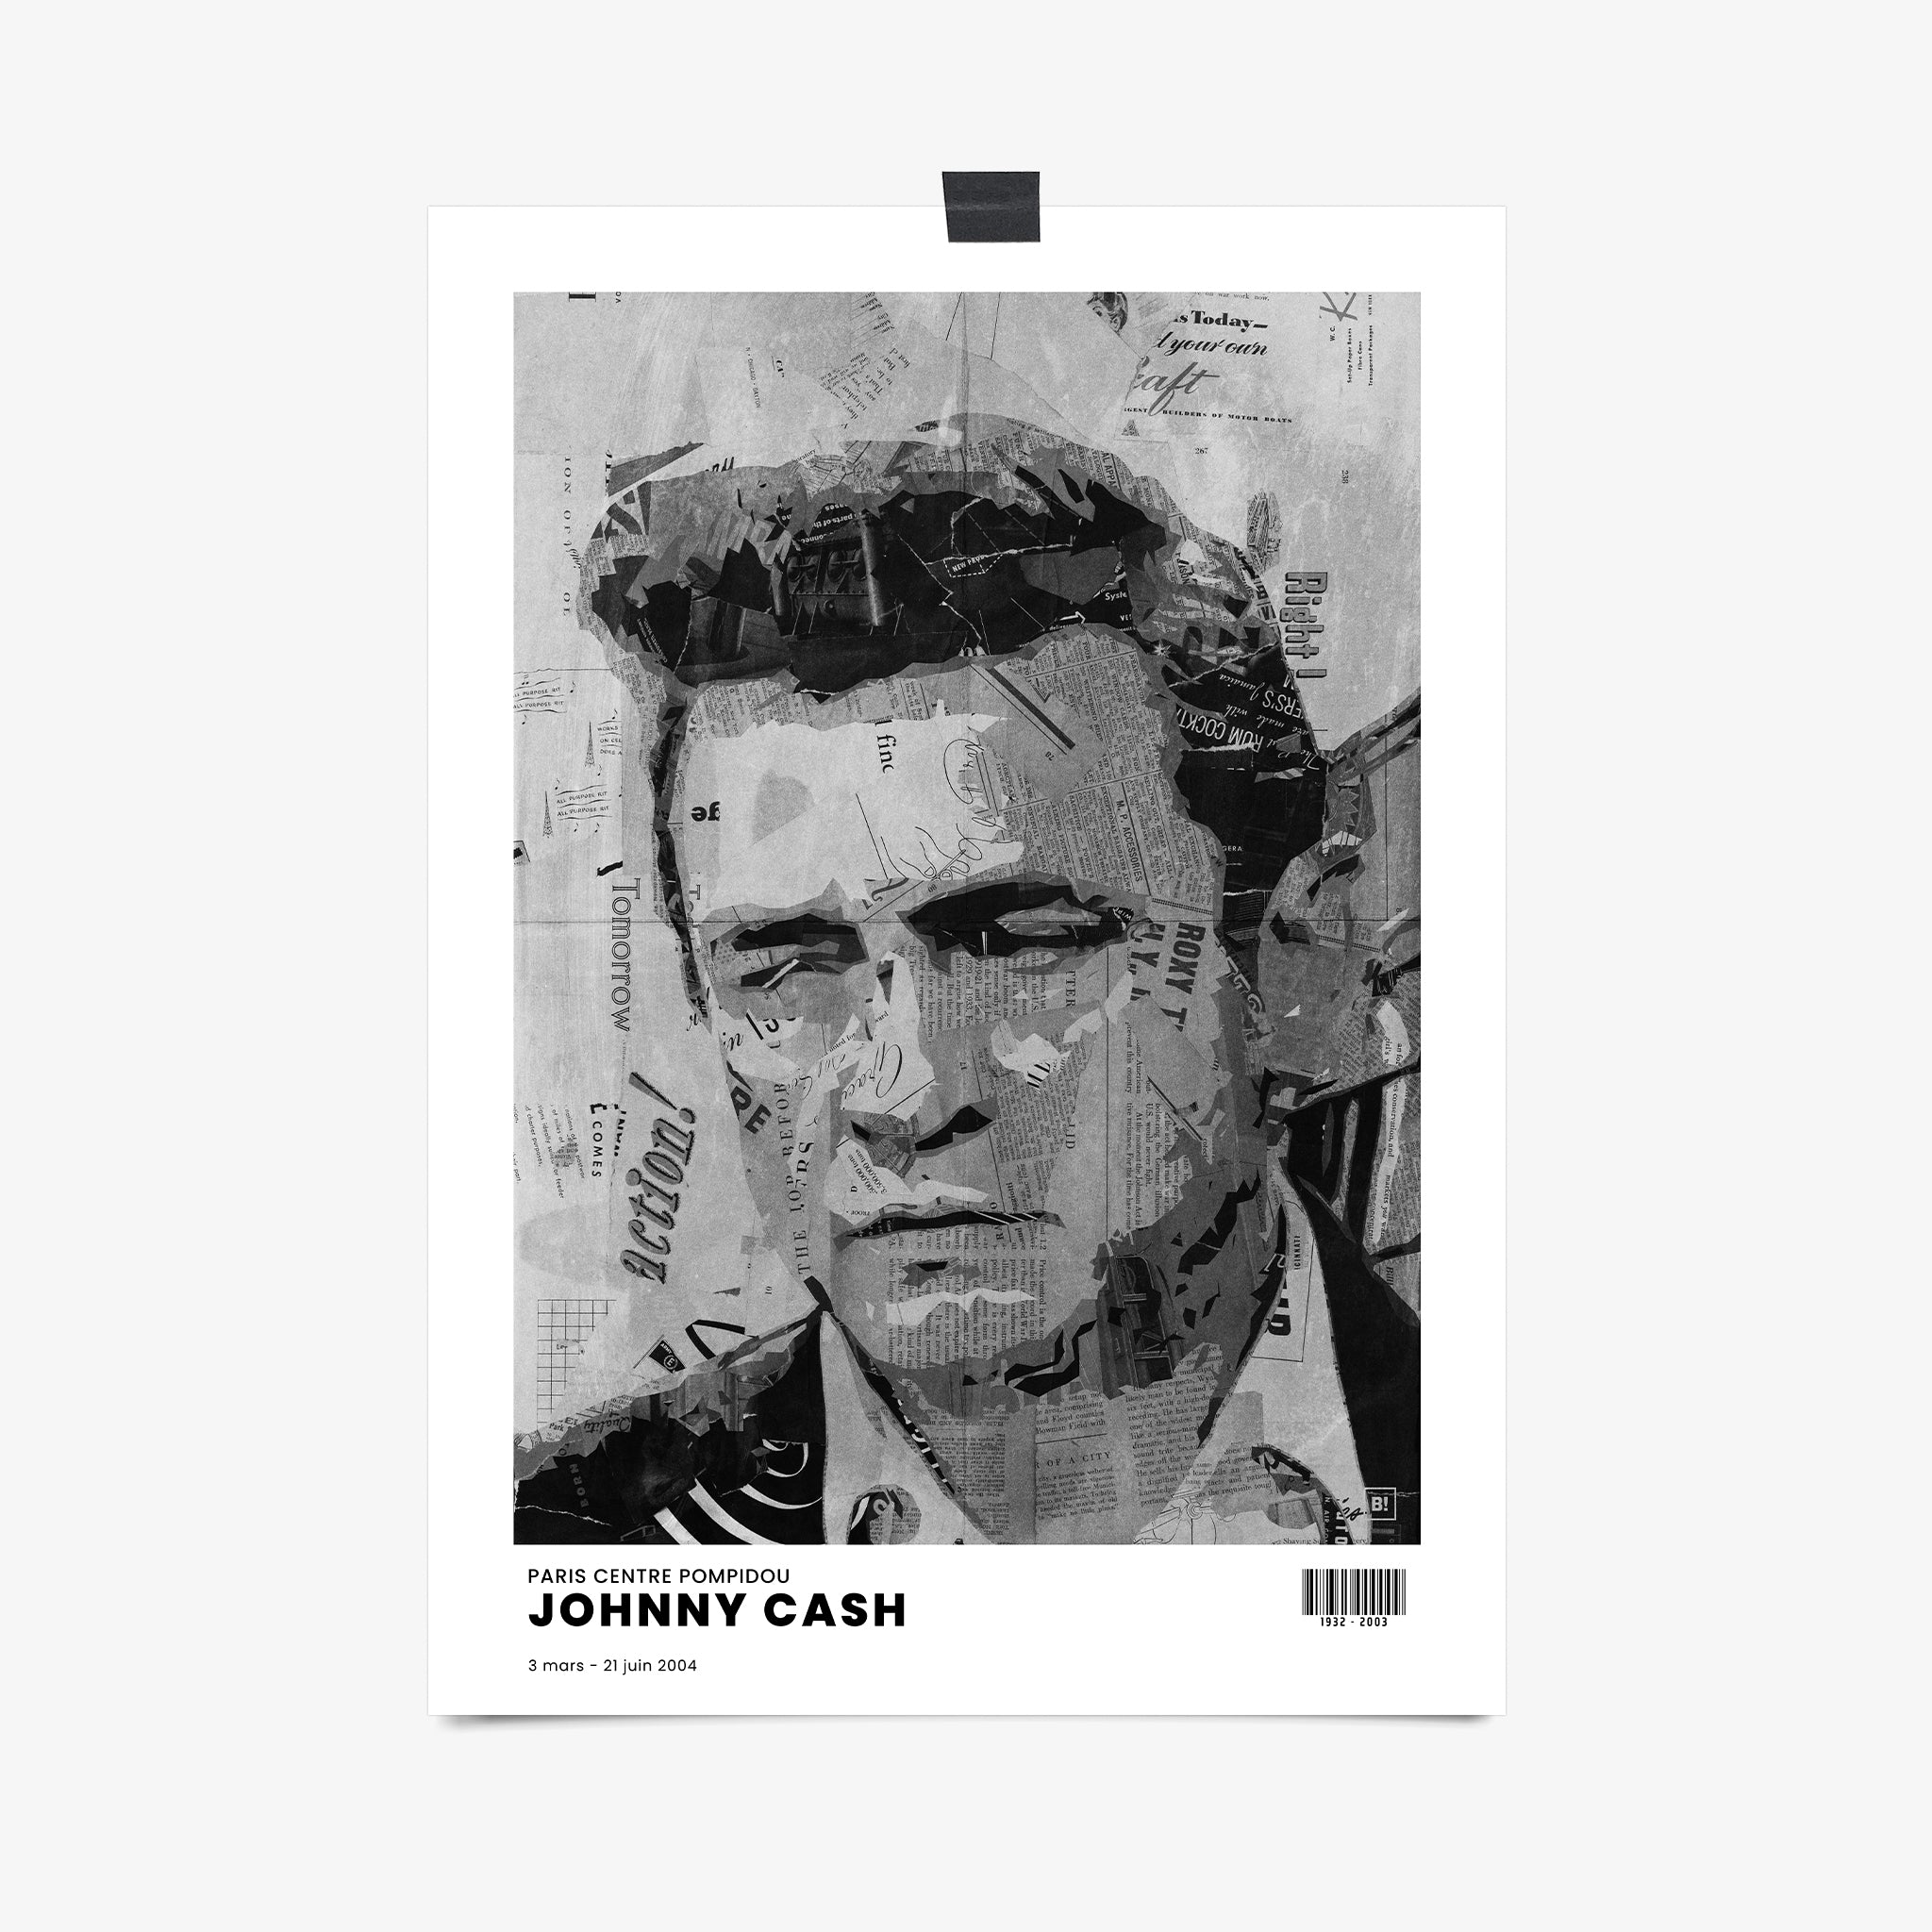 Be inspired by Iconic Johnny Cash Paris Centre Pompidou Exhibition Art Print. This artwork is printed using giclée on archival acid-free paper, capturing its timeless beauty in every detail.